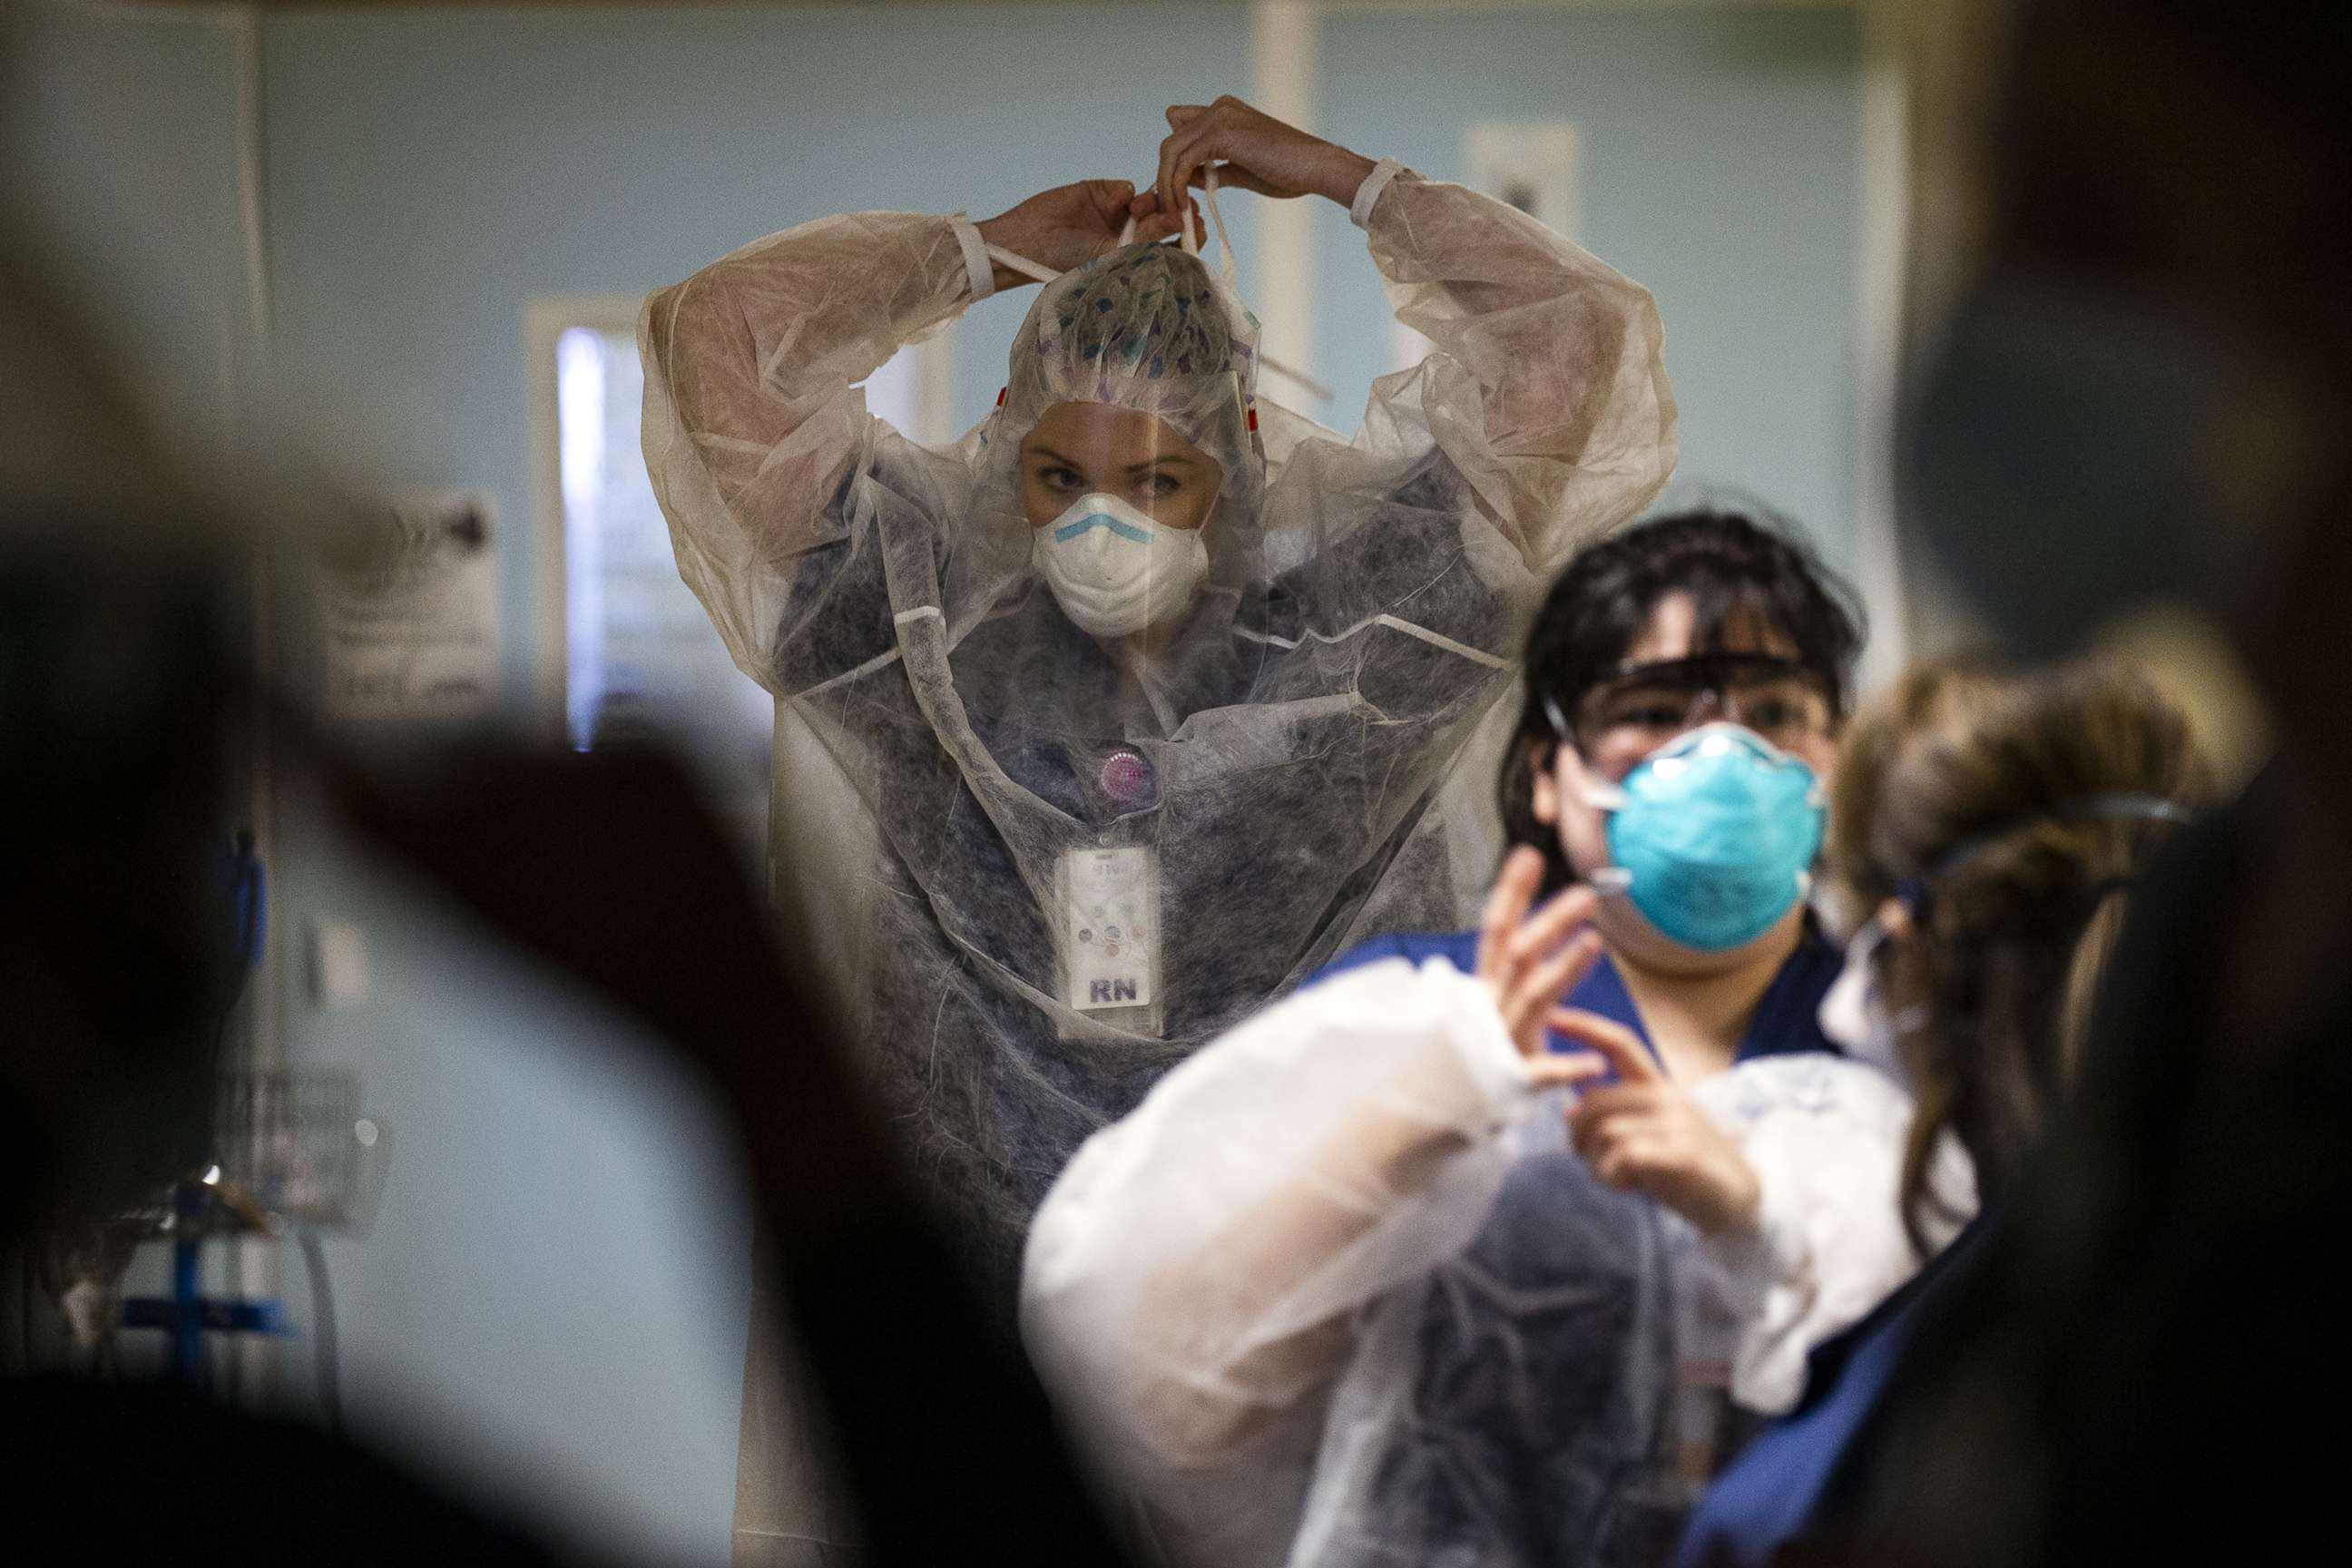 PHOTO: Caregivers put on PPE to enter a COVID-19 patient's room in the ICU of the Sharp Coronado Hospital, amid coronavirus pandemic in Coronado, west of San Diego, Calif., Jan. 20, 2021. 